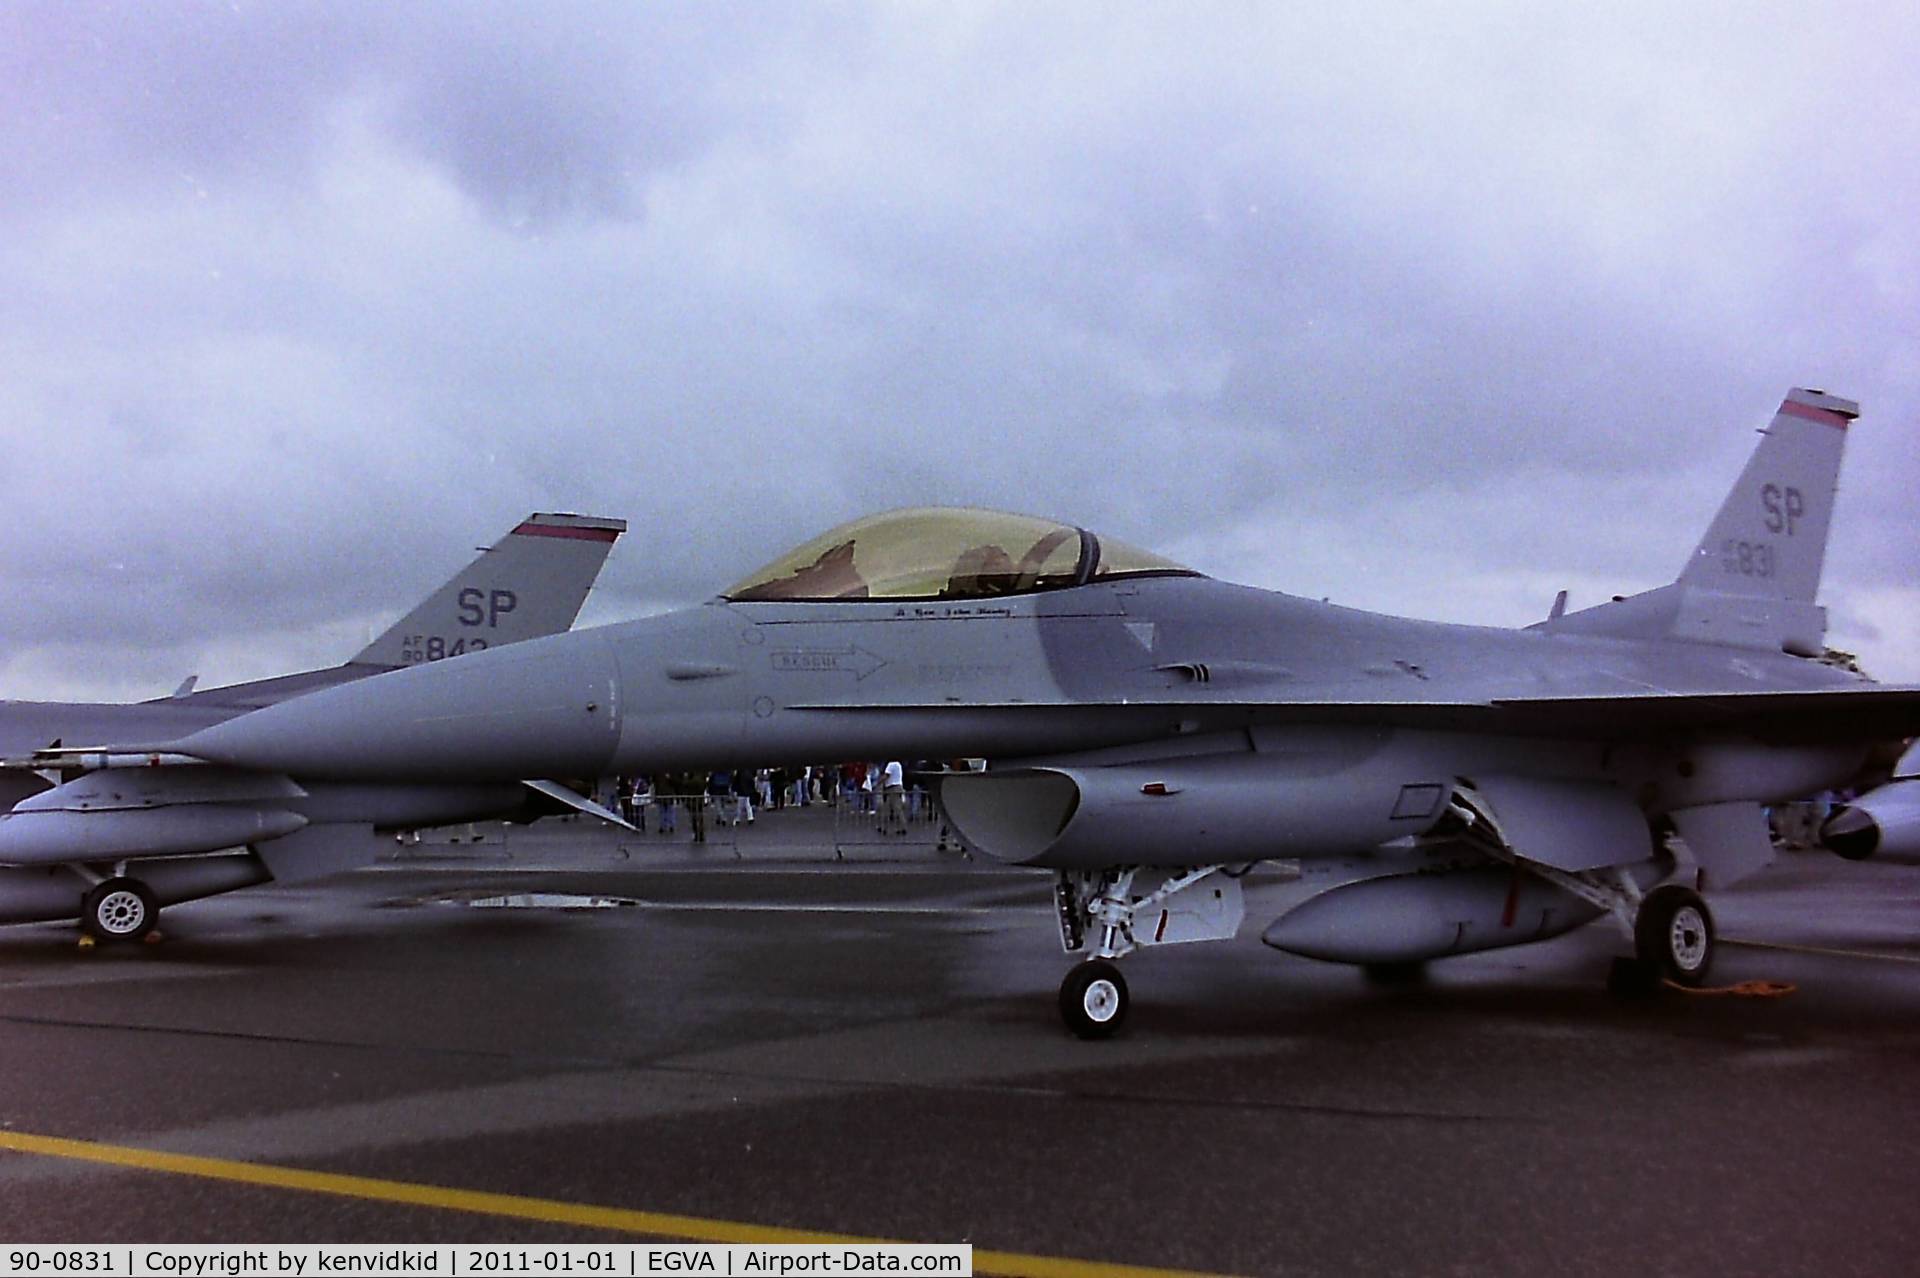 90-0831, 1990 General Dynamics F-16C Fighting Falcon C/N CC-31, At RIAT 1993, scanned from negative.